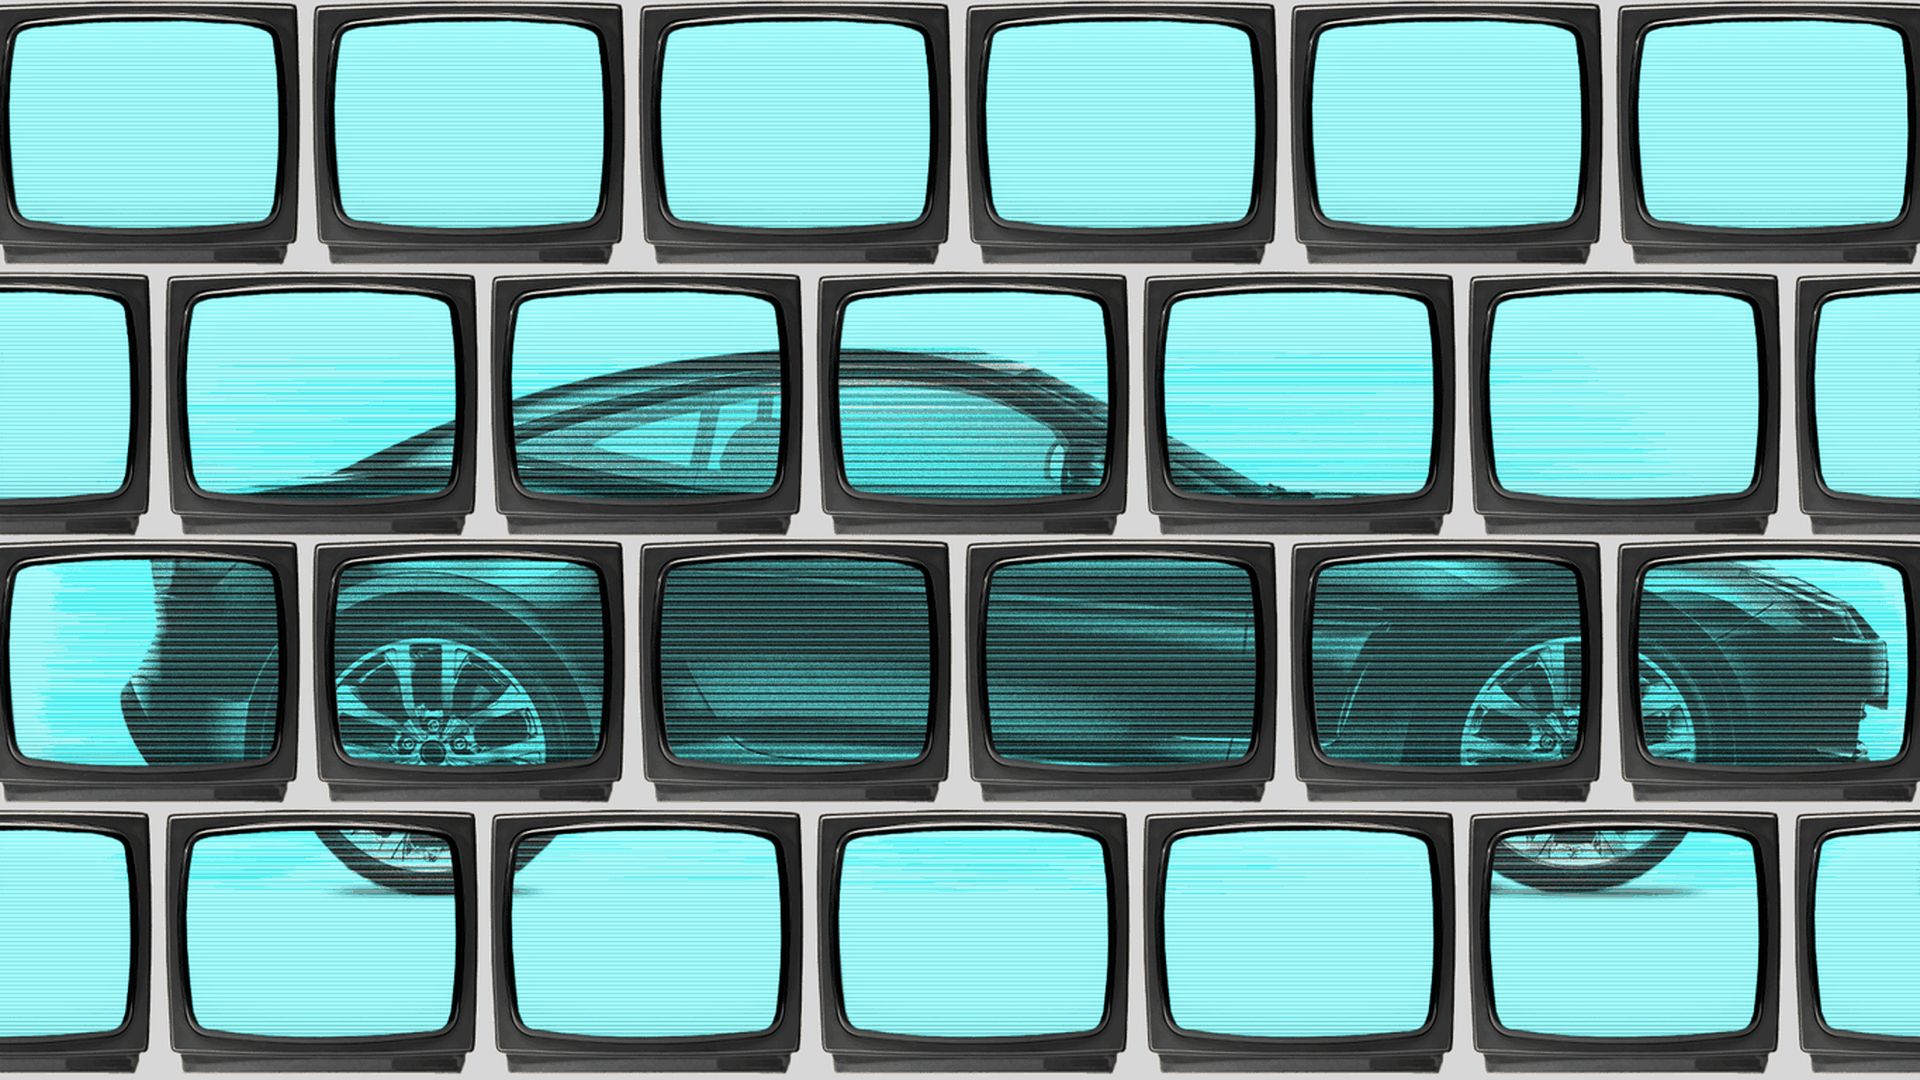 Illustration of a car as seen through a series of TV screens